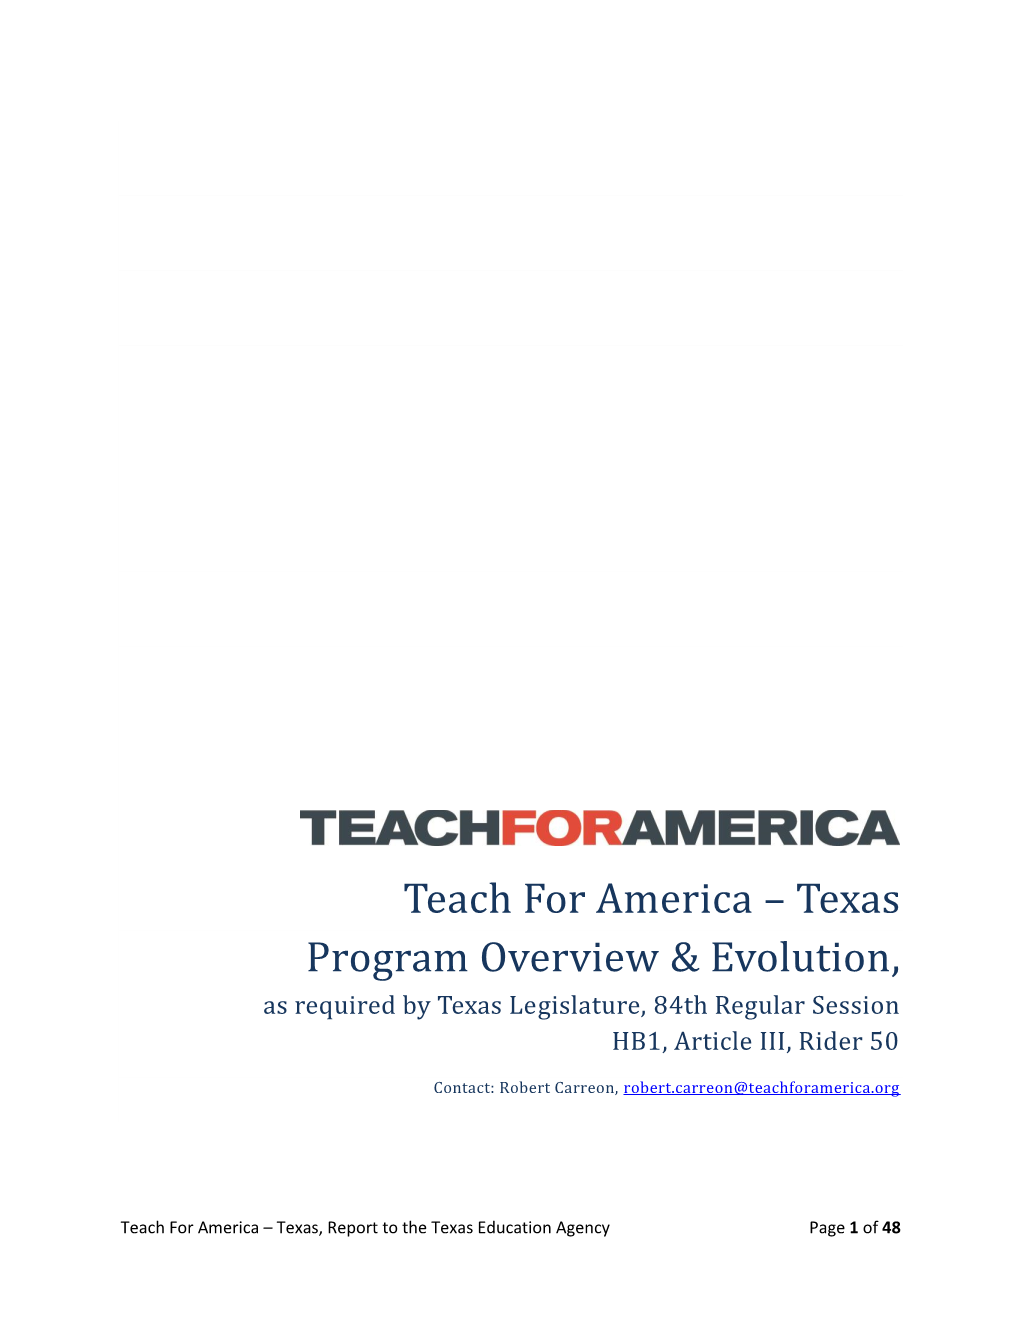 Teach for America – Texas Program Overview & Evolution, As Required by Texas Legislature, 84Th Regular Session HB1, Article III, Rider 50